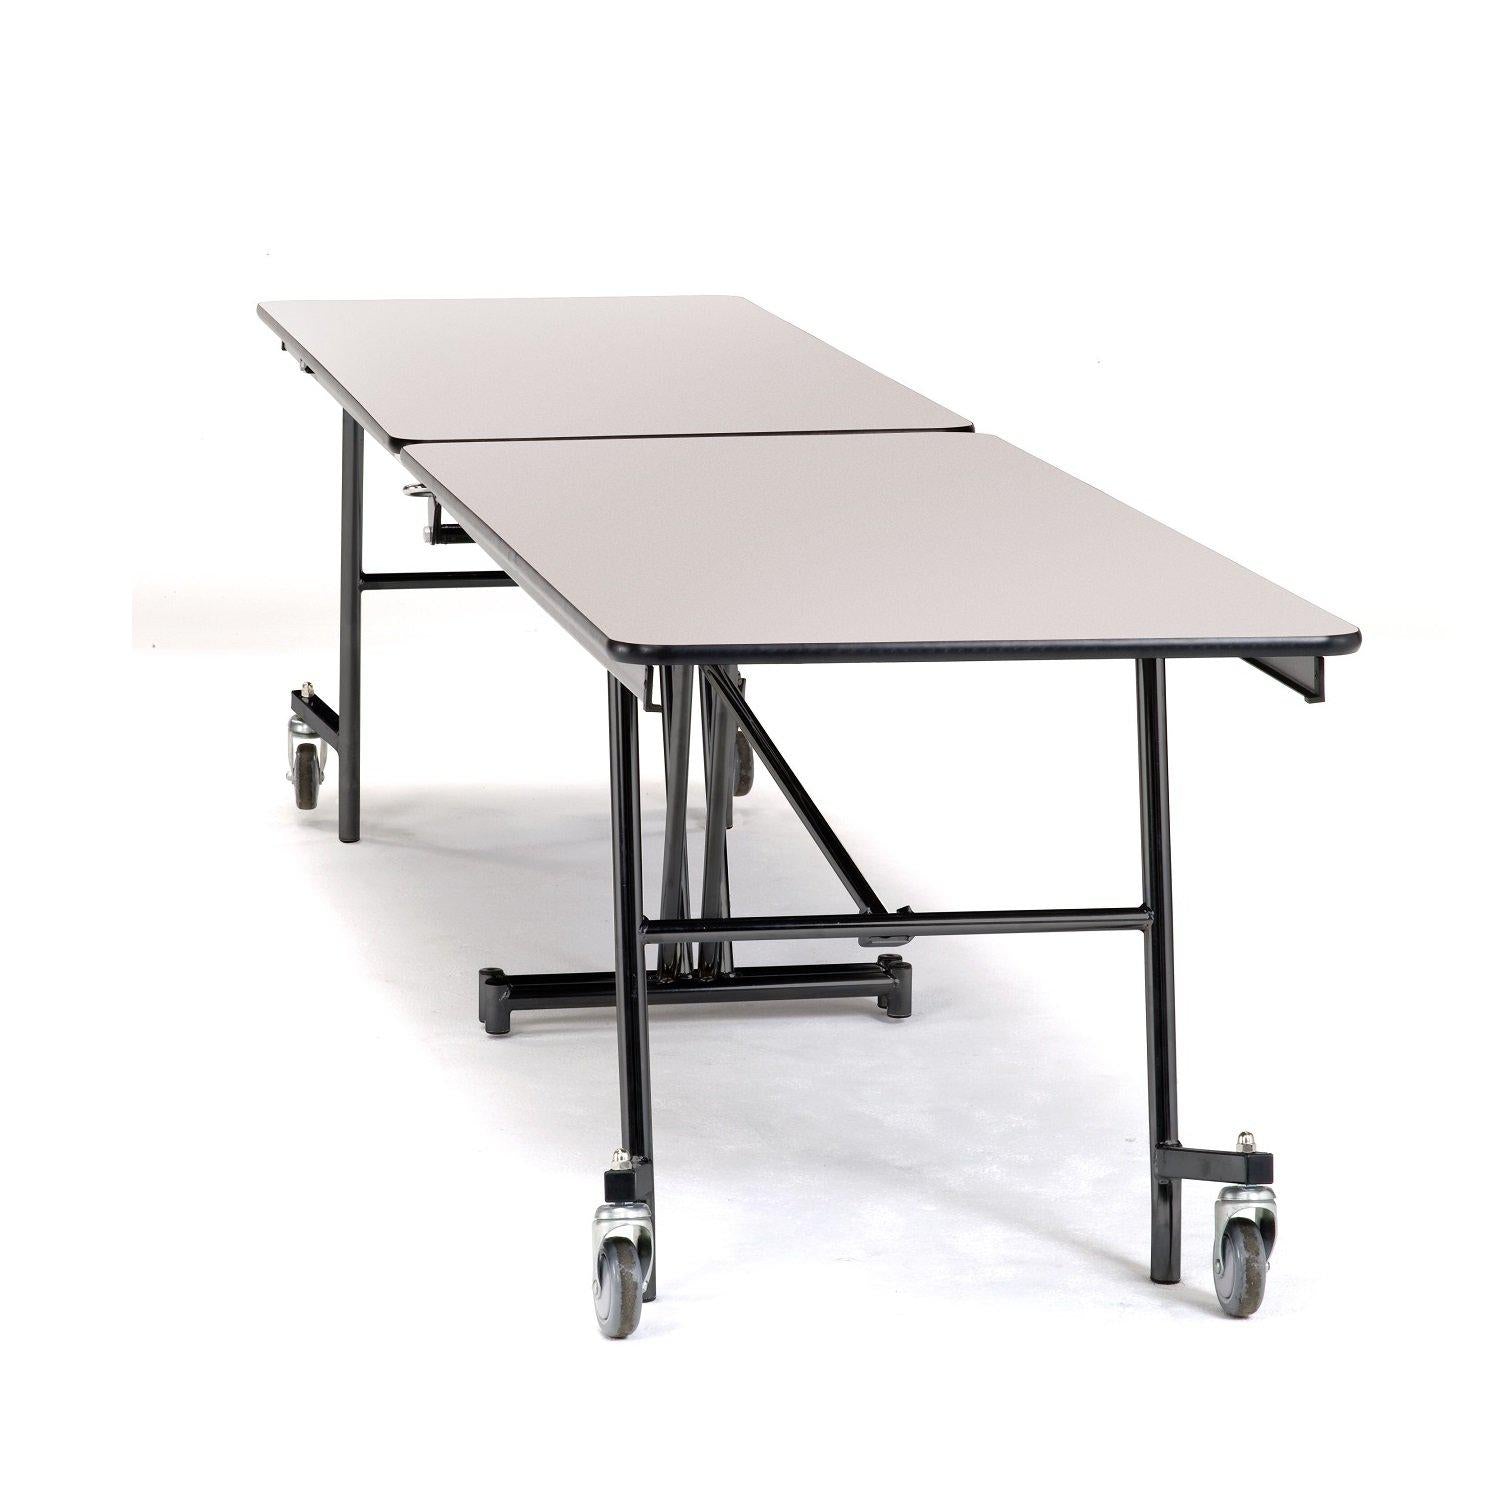 Mobile Shape Cafeteria Table, 10' Rectangle, Particleboard Core, Vinyl T-Mold Edge, Textured Black Frame